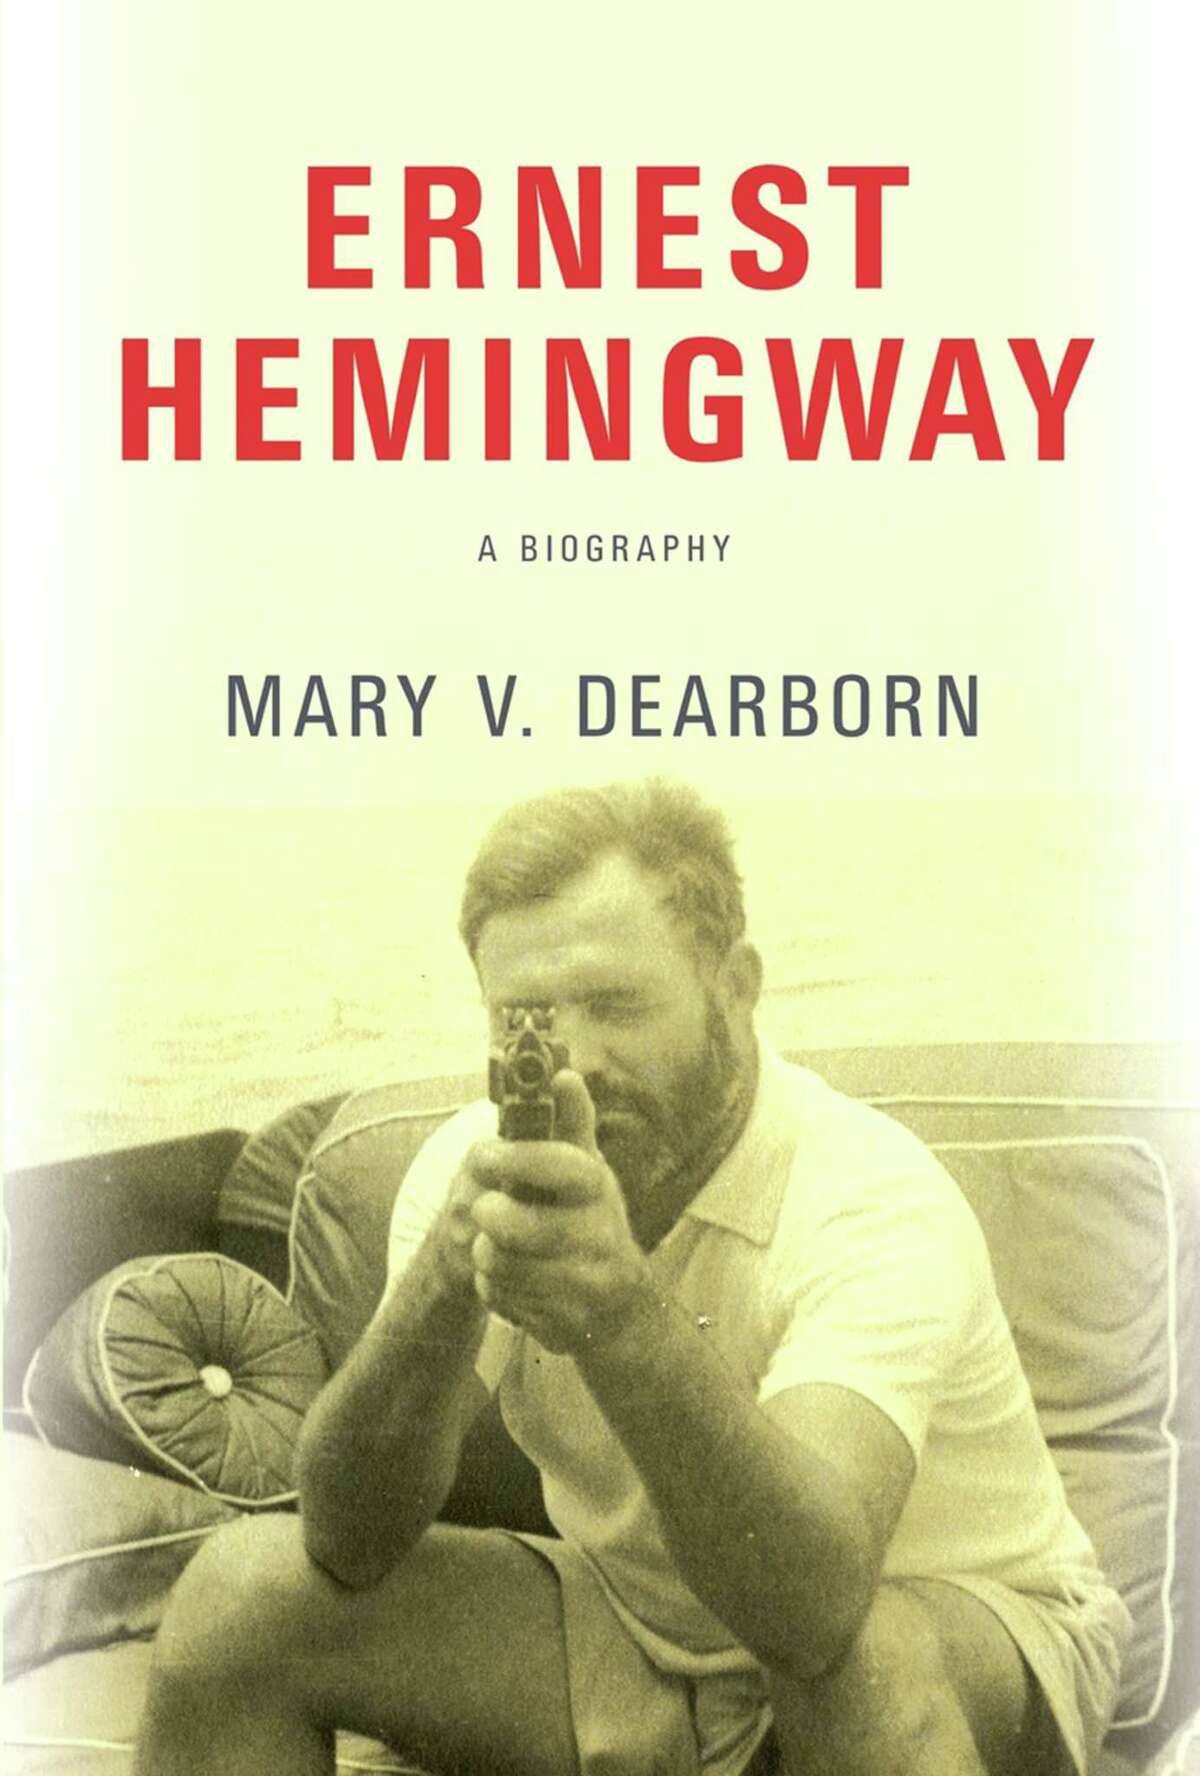 "Ernest Hemingway" by Mary V. Dearborn